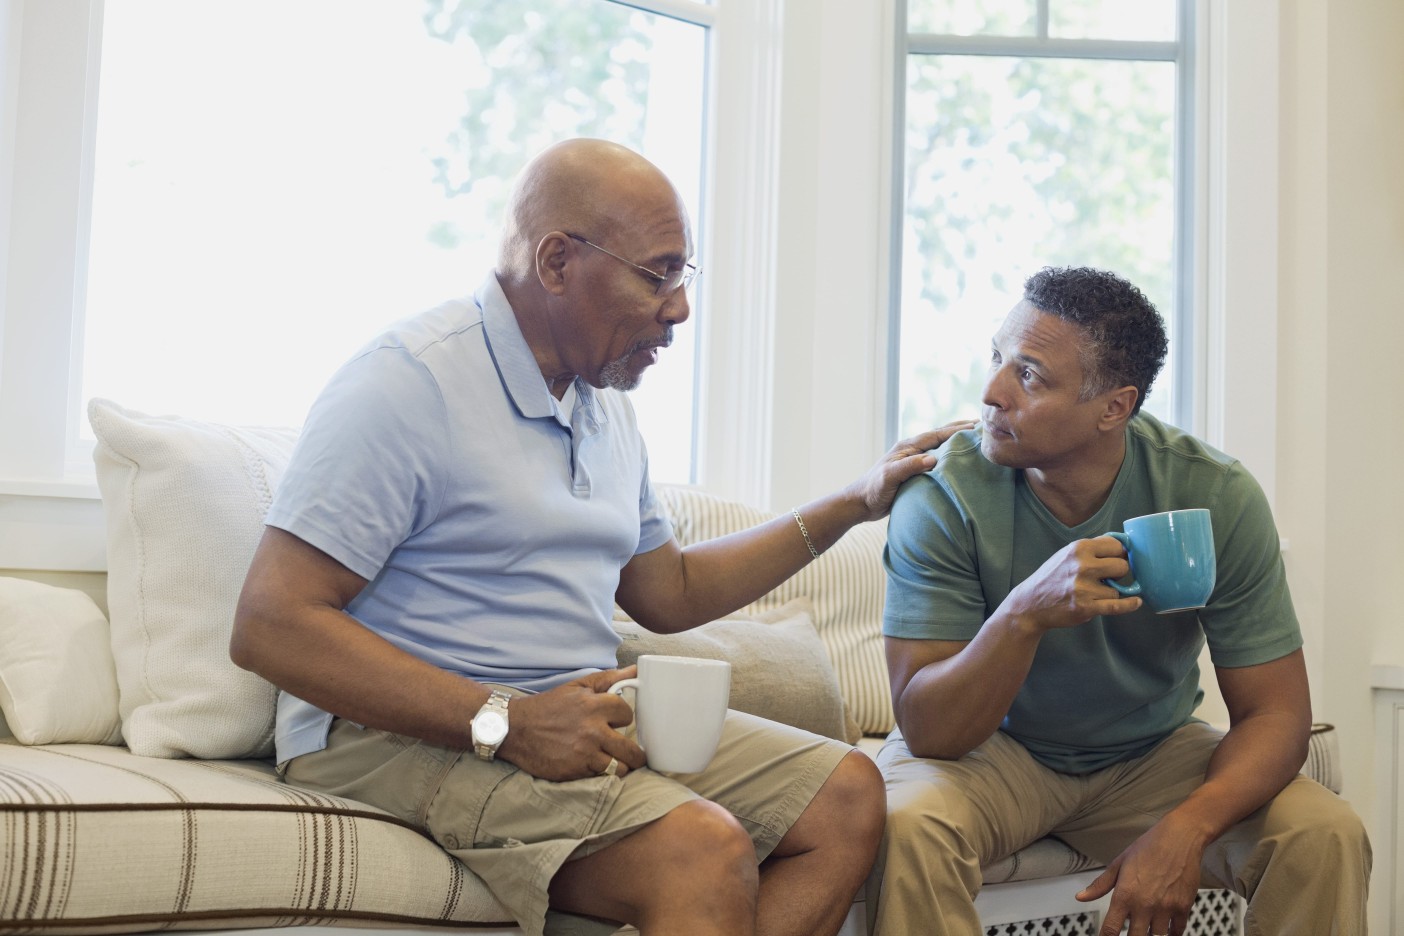 Two men drinking coffee discuss lung and esophageal cancer support groups in a well-lit living room